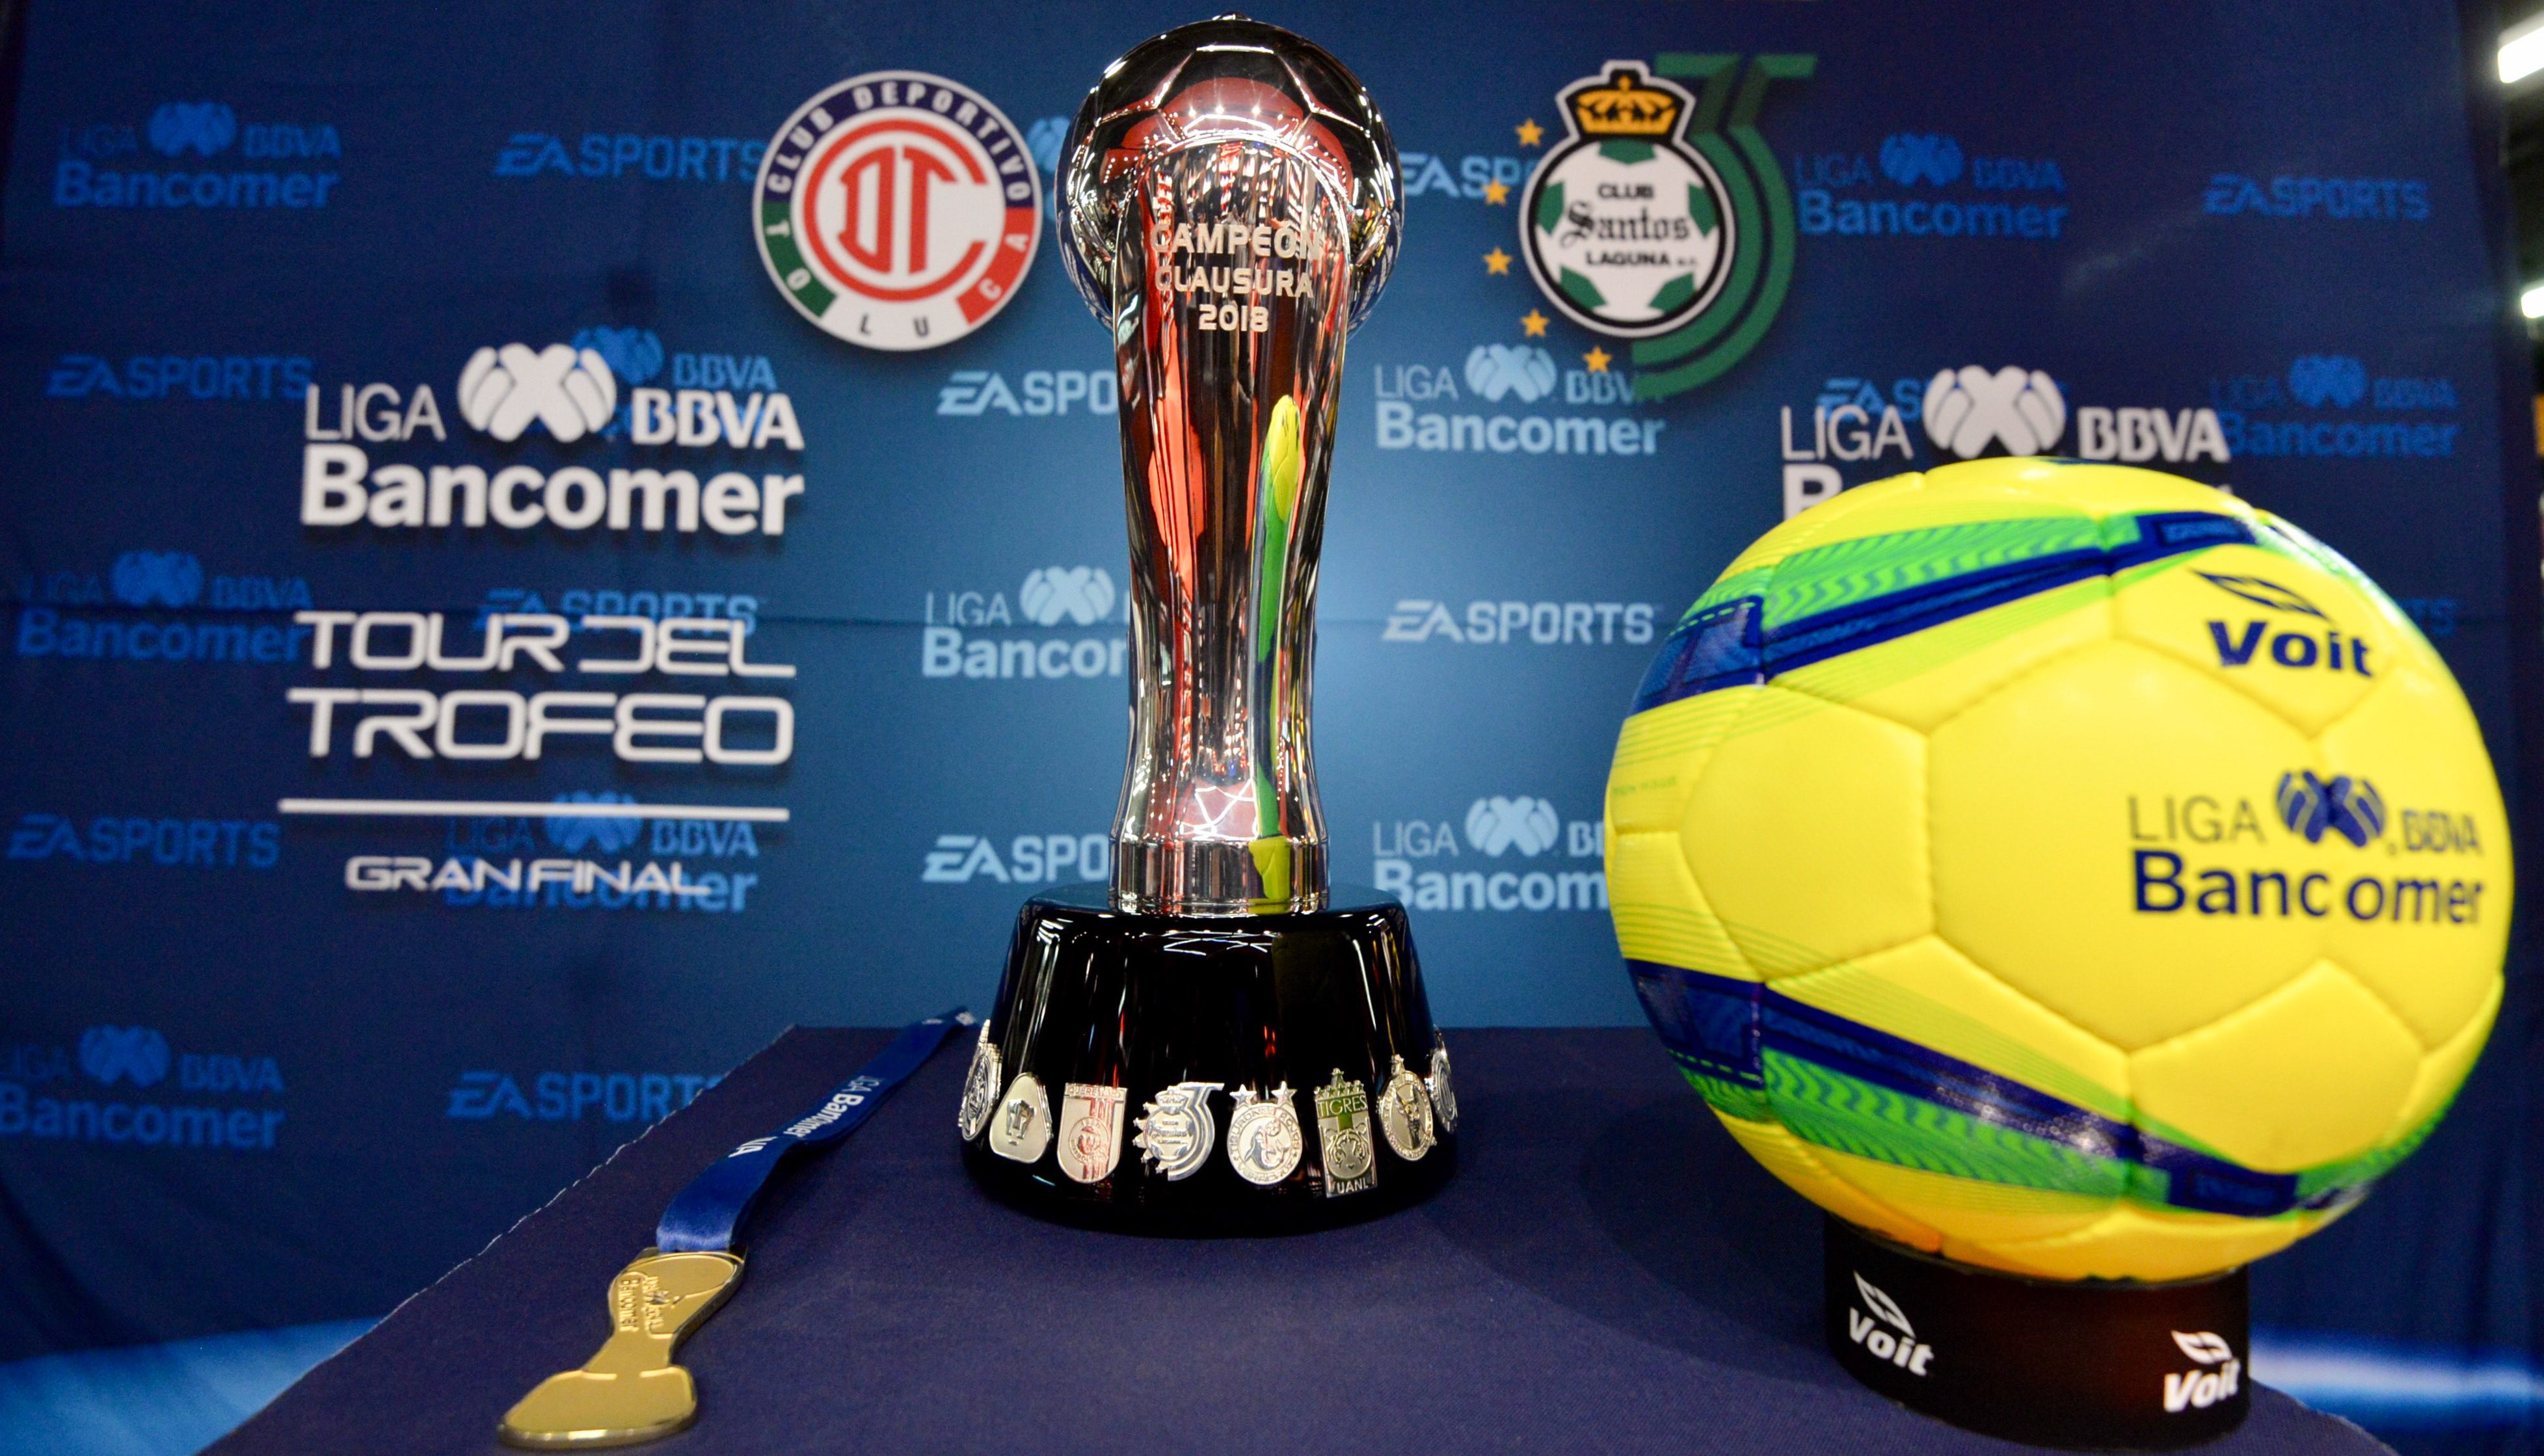 The semi-finals of the LIGA MX begin on Wednesday